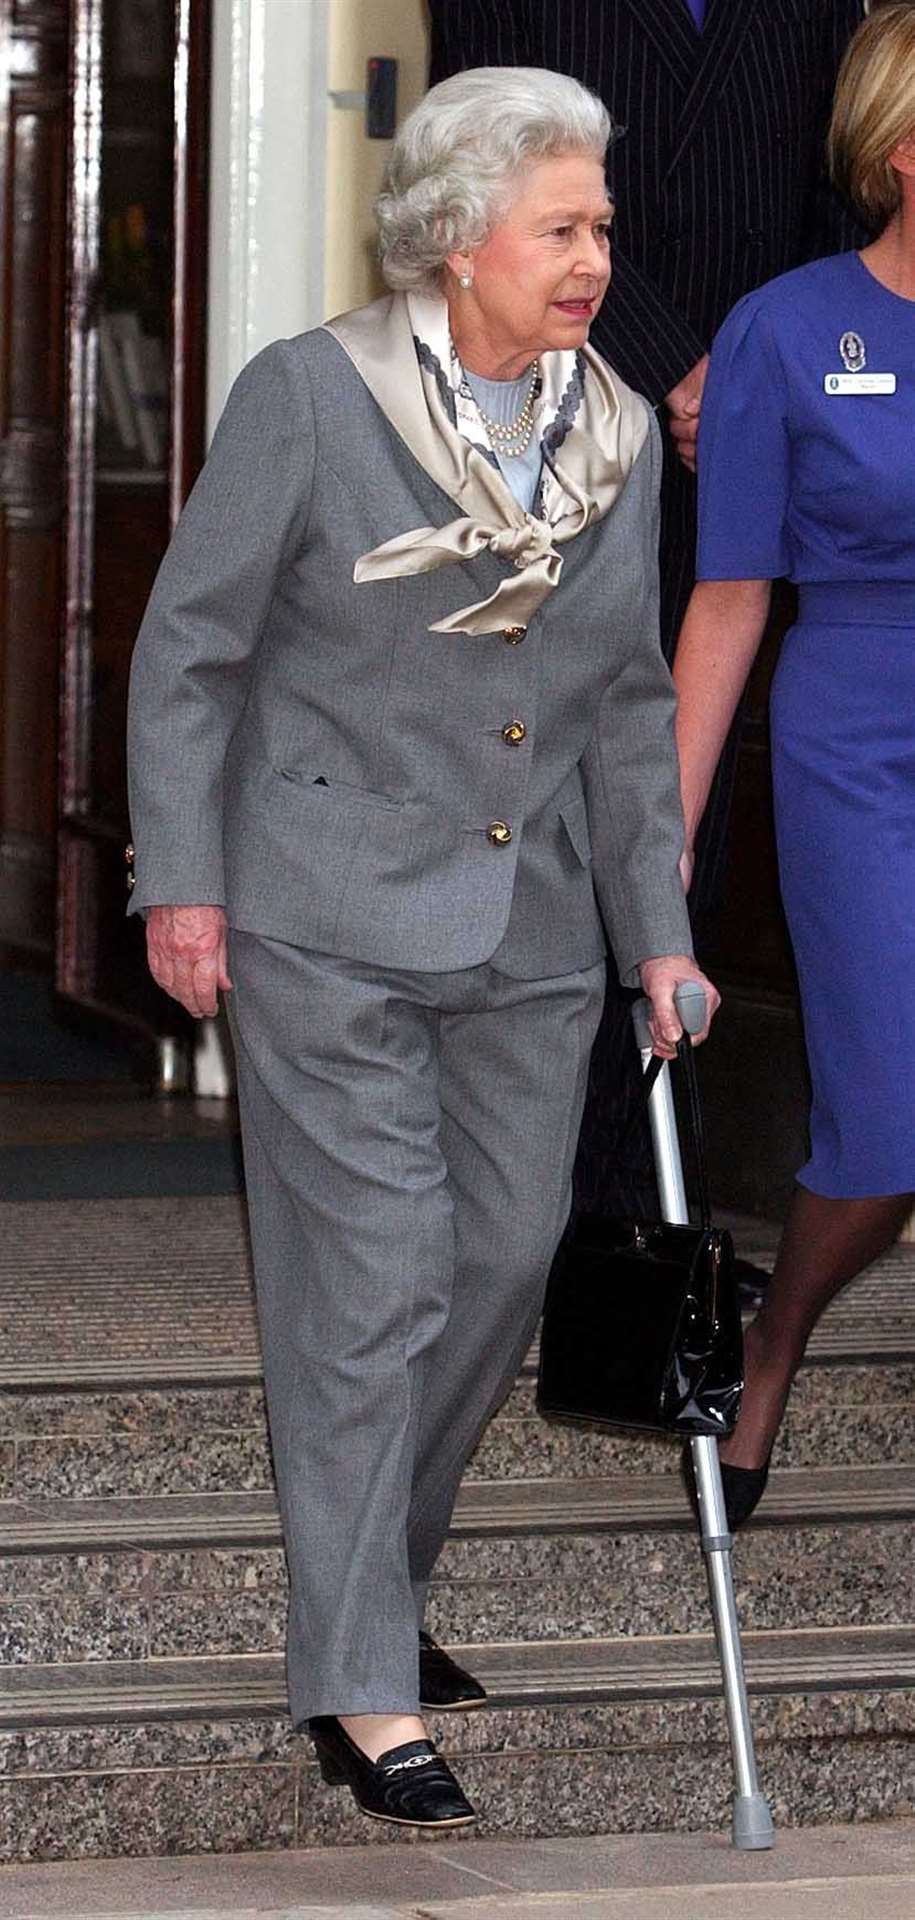 The Queen walks with a stick as she leaves King Edward VII’s Hospital after keyhole surgery in 2003 (John Stillwell/PA)